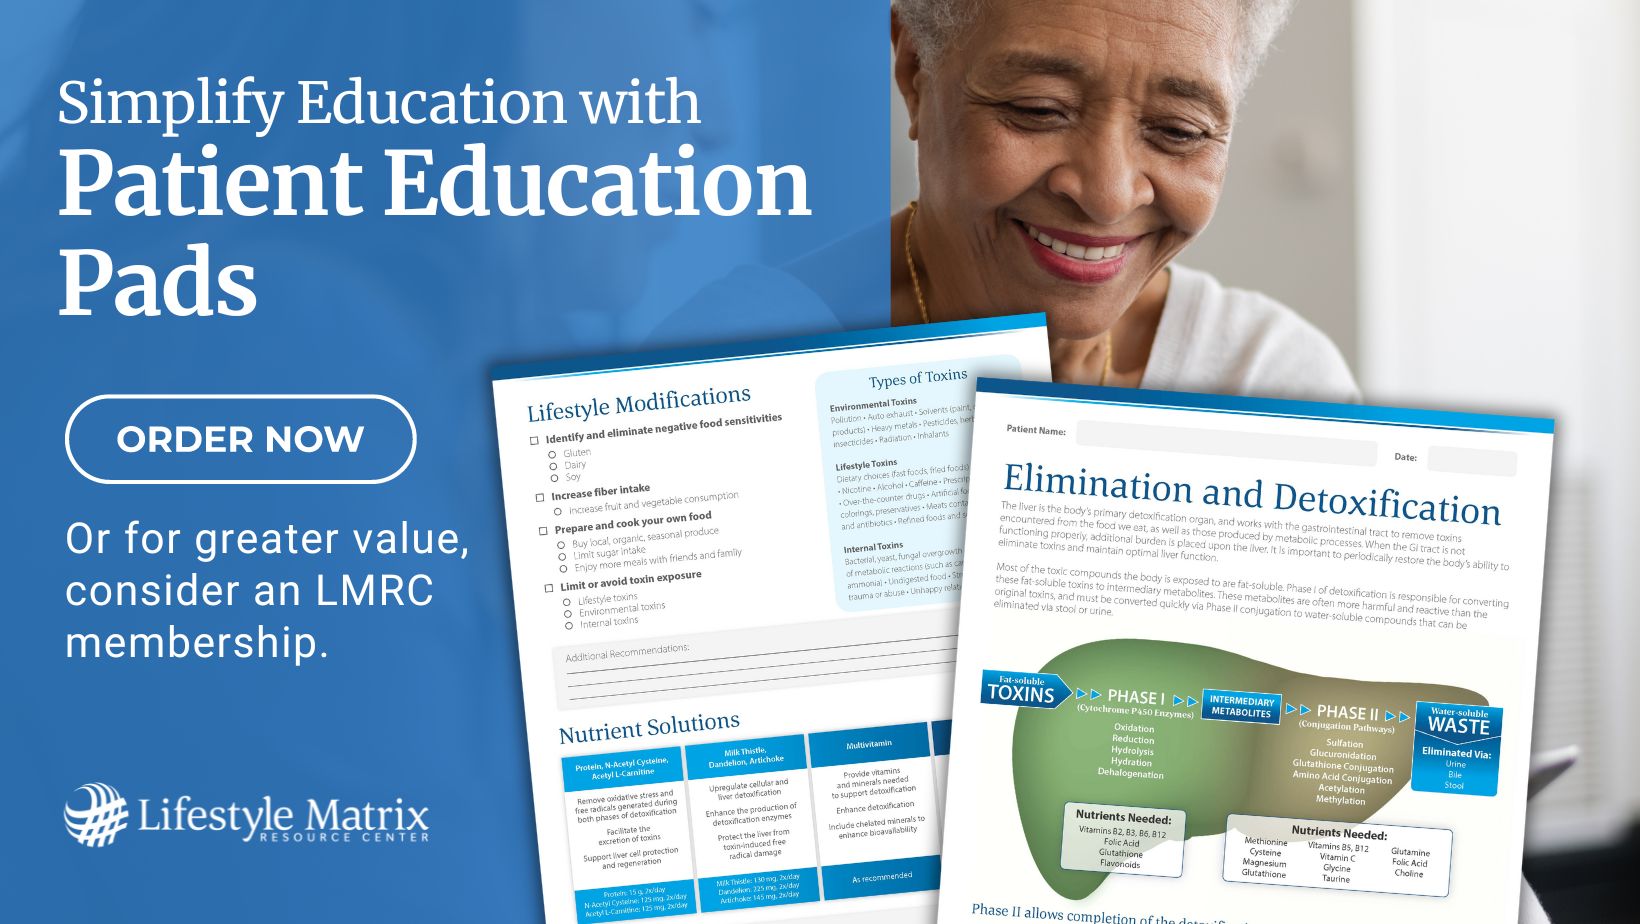 Patient education tools available though LMRC Membership